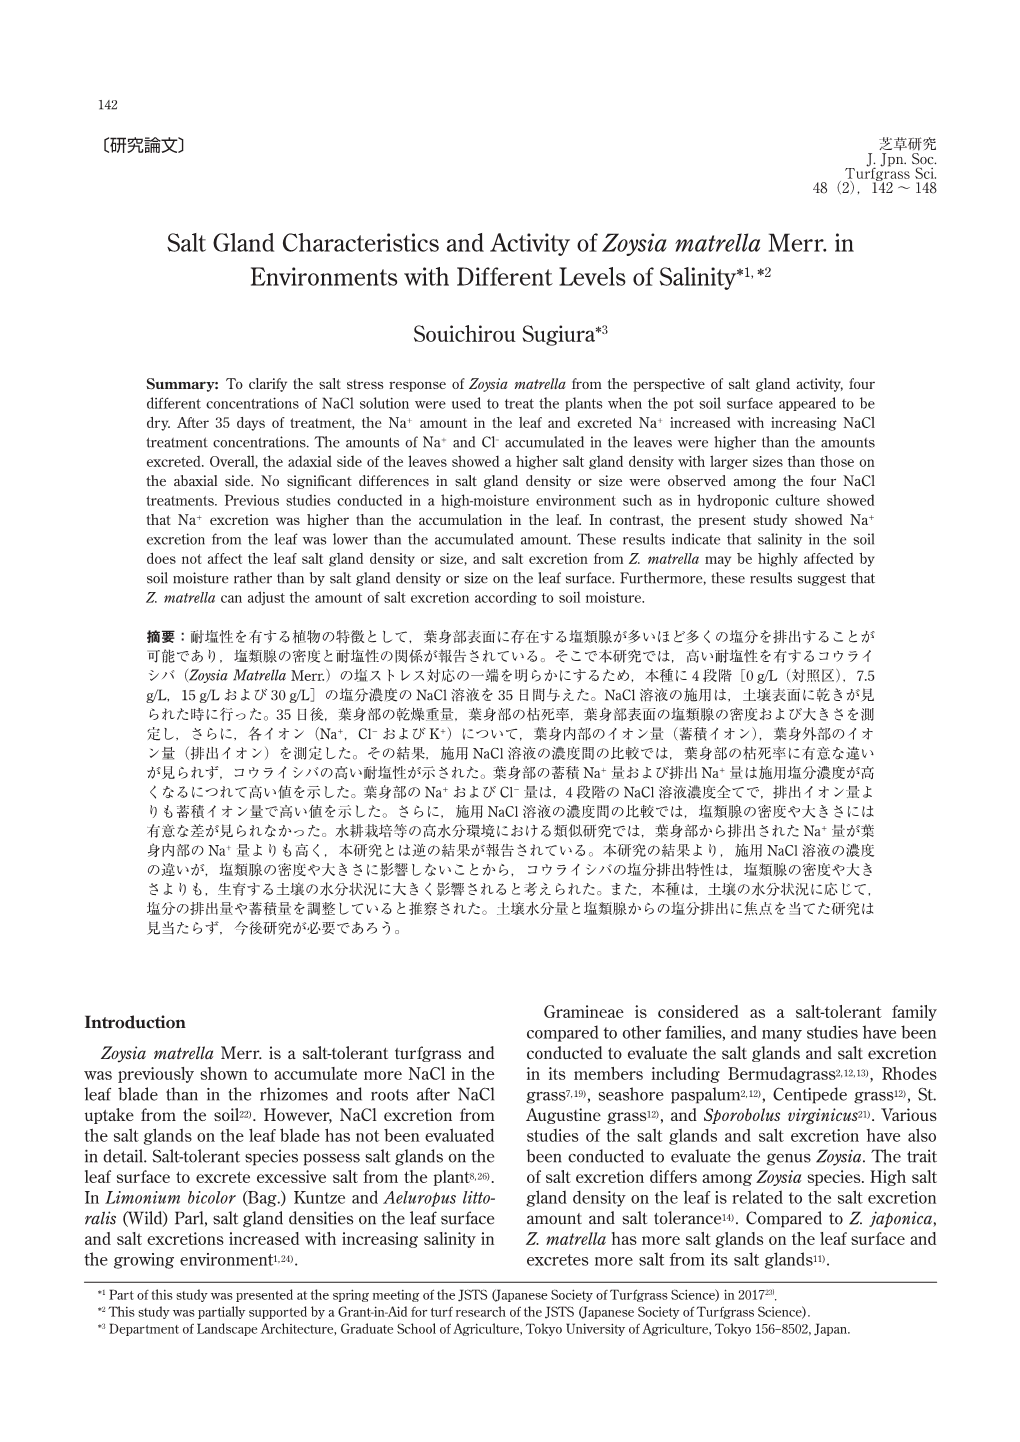 Salt Gland Characteristics and Activity of Zoysia Matrella Merr. in Environments with Different Levels of Salinity*1, *2